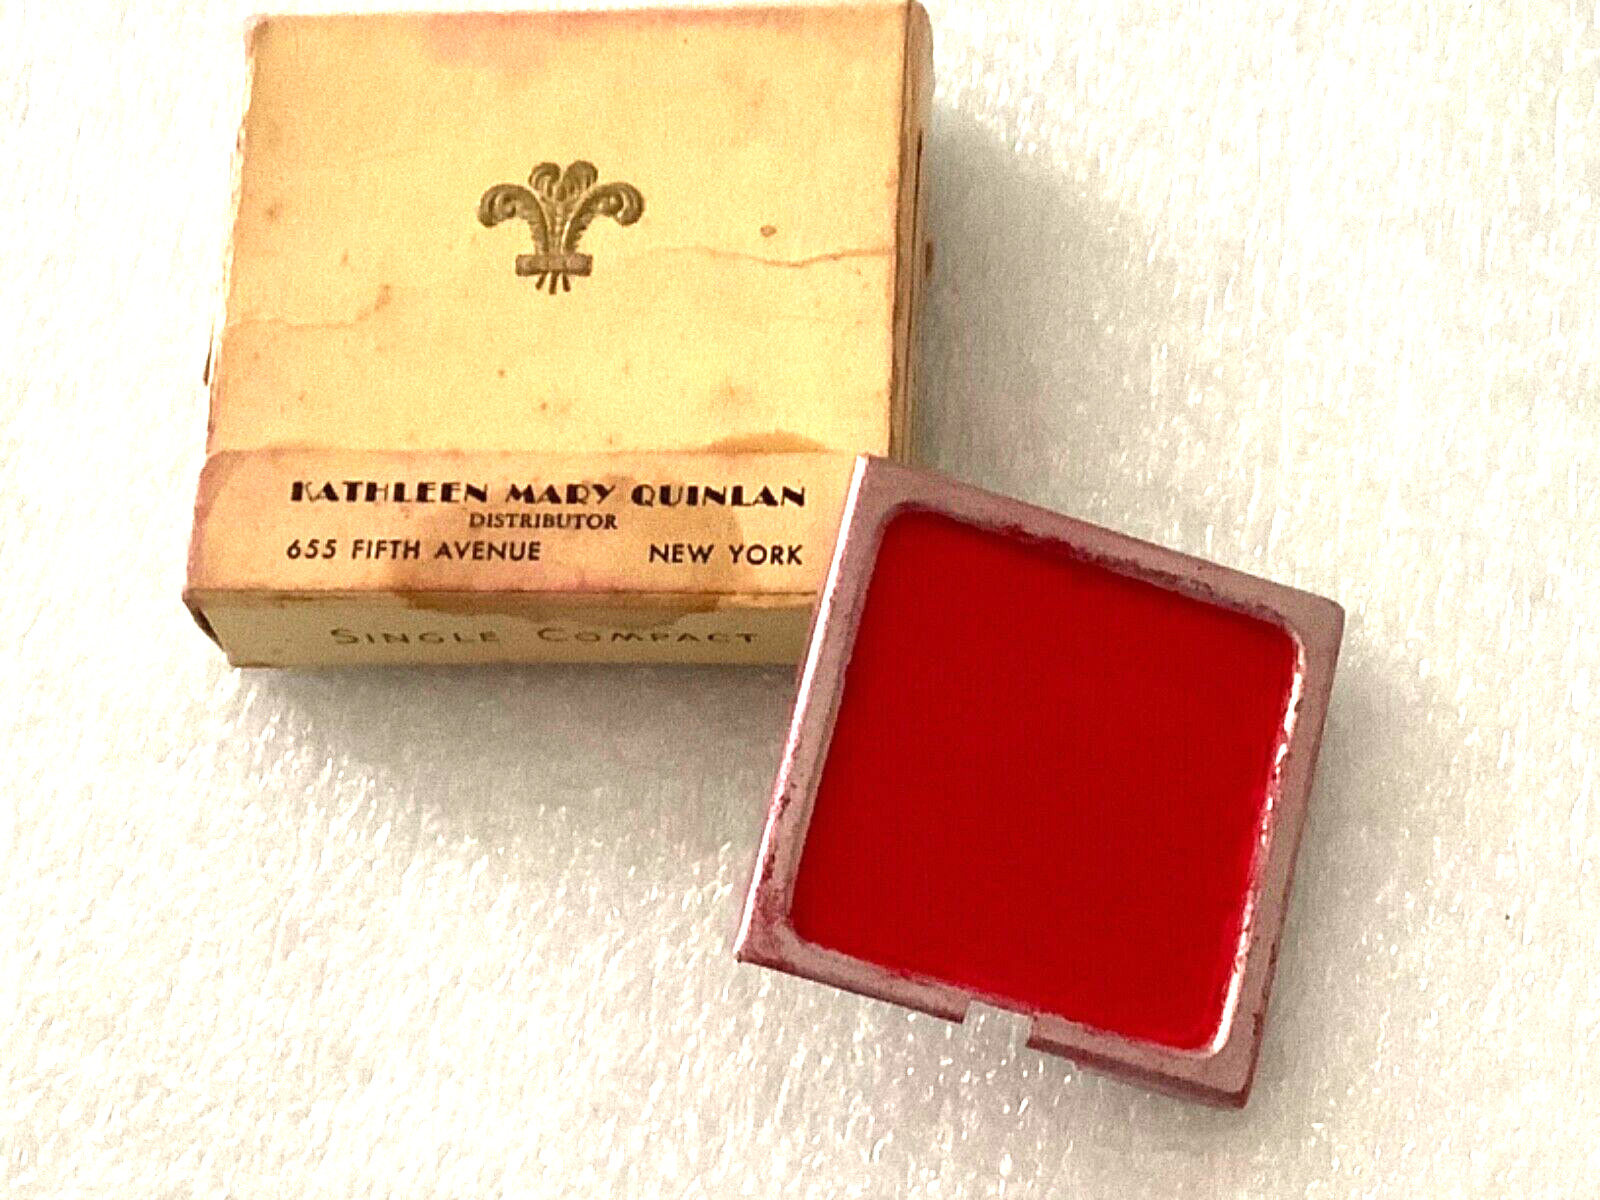 QUINLAN ROUGE REFILL (KATHLEEN MARY)  In ORIGINAL BOX Vintage NOS